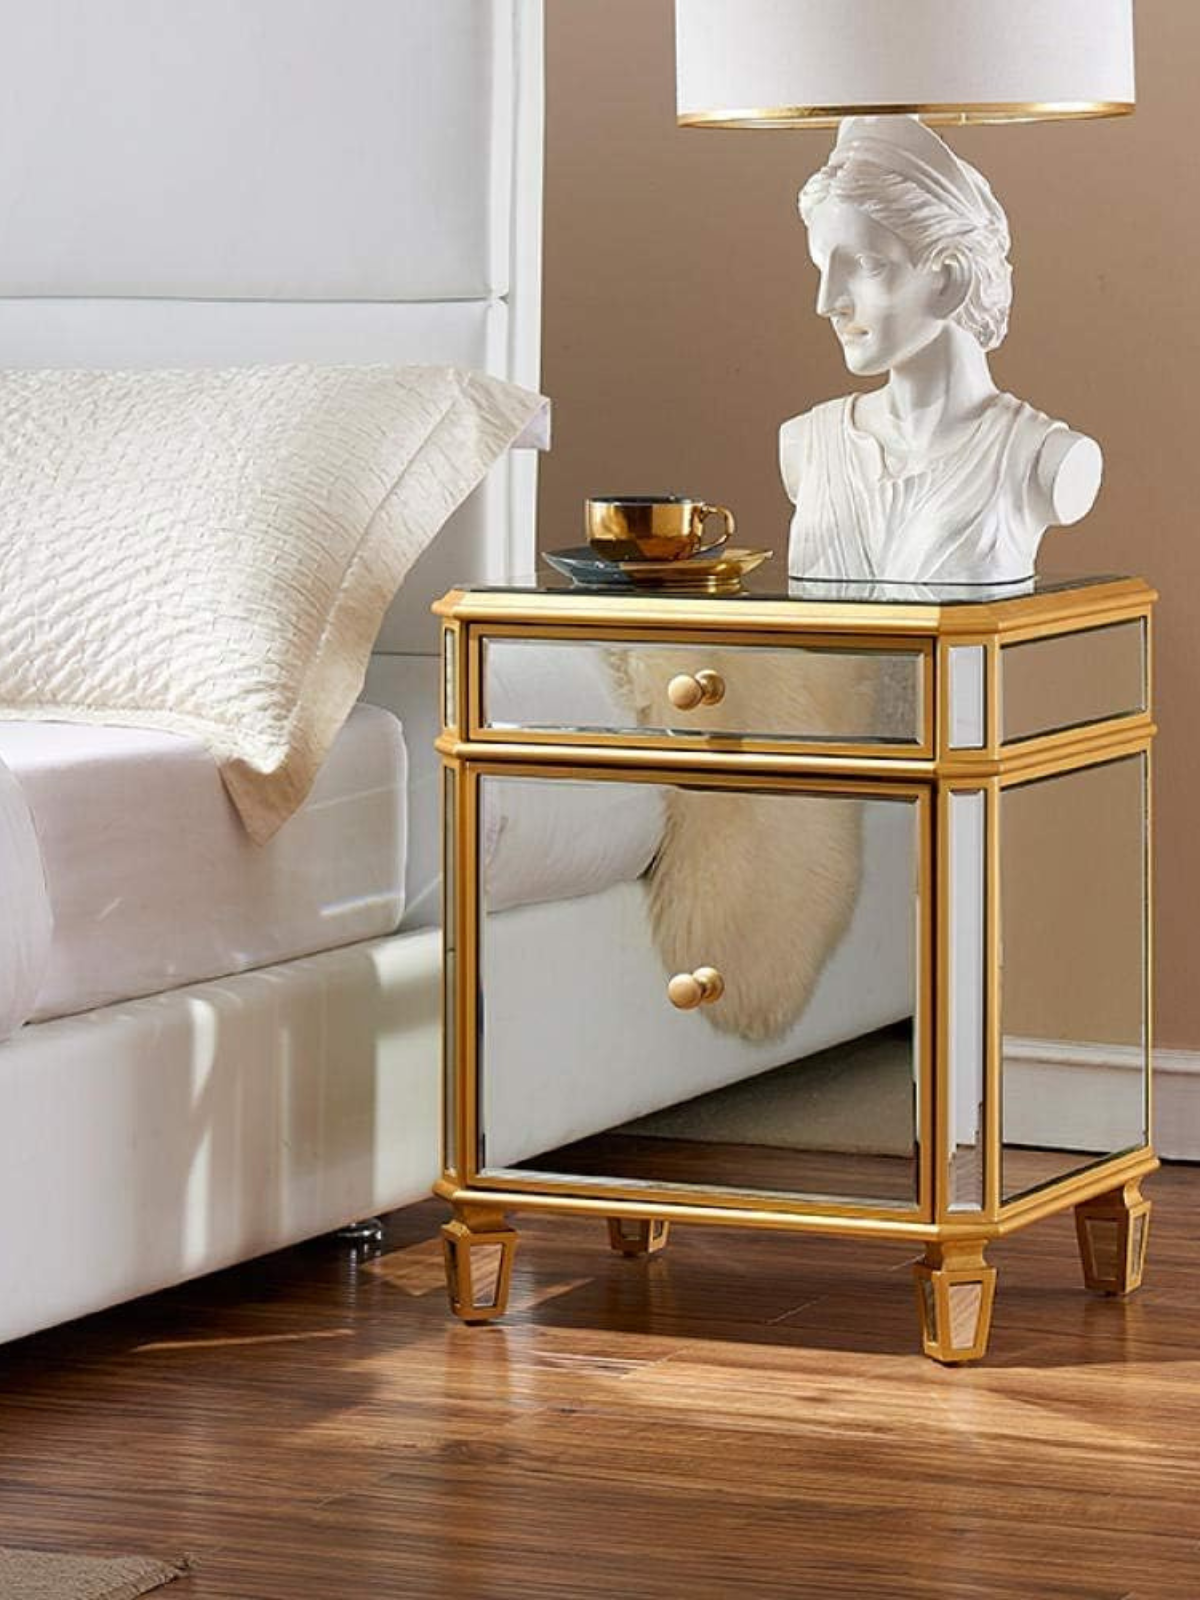 Mirrored Bedside Table Modern Coffee Tea Table Bedroom Night Stand Chest Drawers Locker Sofa Table Hall Way Living Room Office Narrow Table Home-Outfit_Champagne Silver